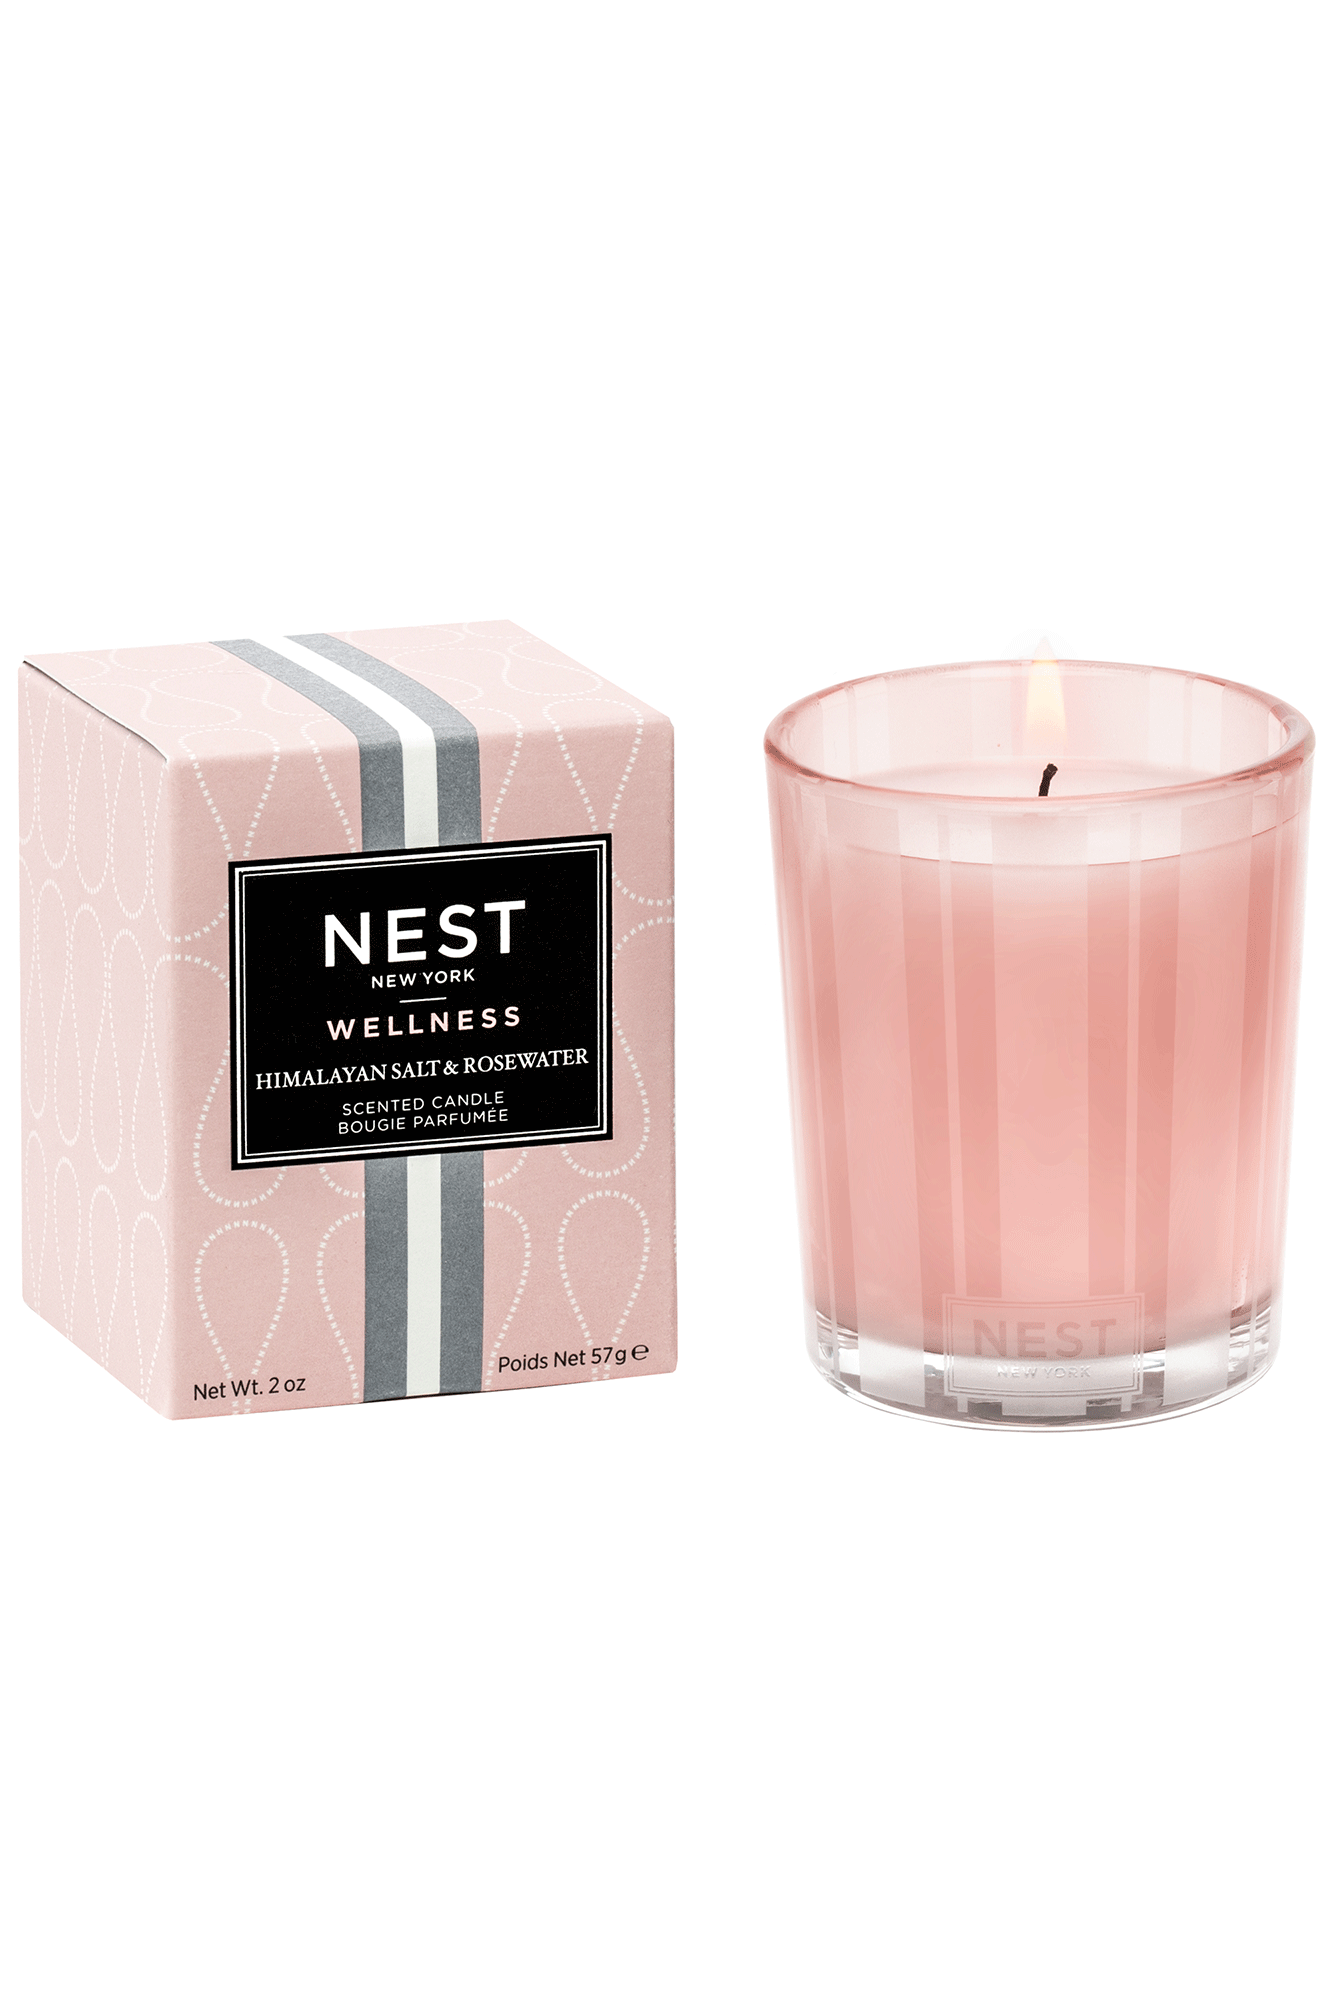 Enjoy a calming atmosphere with the Himalayan Salt & Rosewater Votive Candle from Nest. Infused with notes of rosewater, geranium, salted amber, and white woods, this scented candle will help to ease your mind and soothe your spirit.